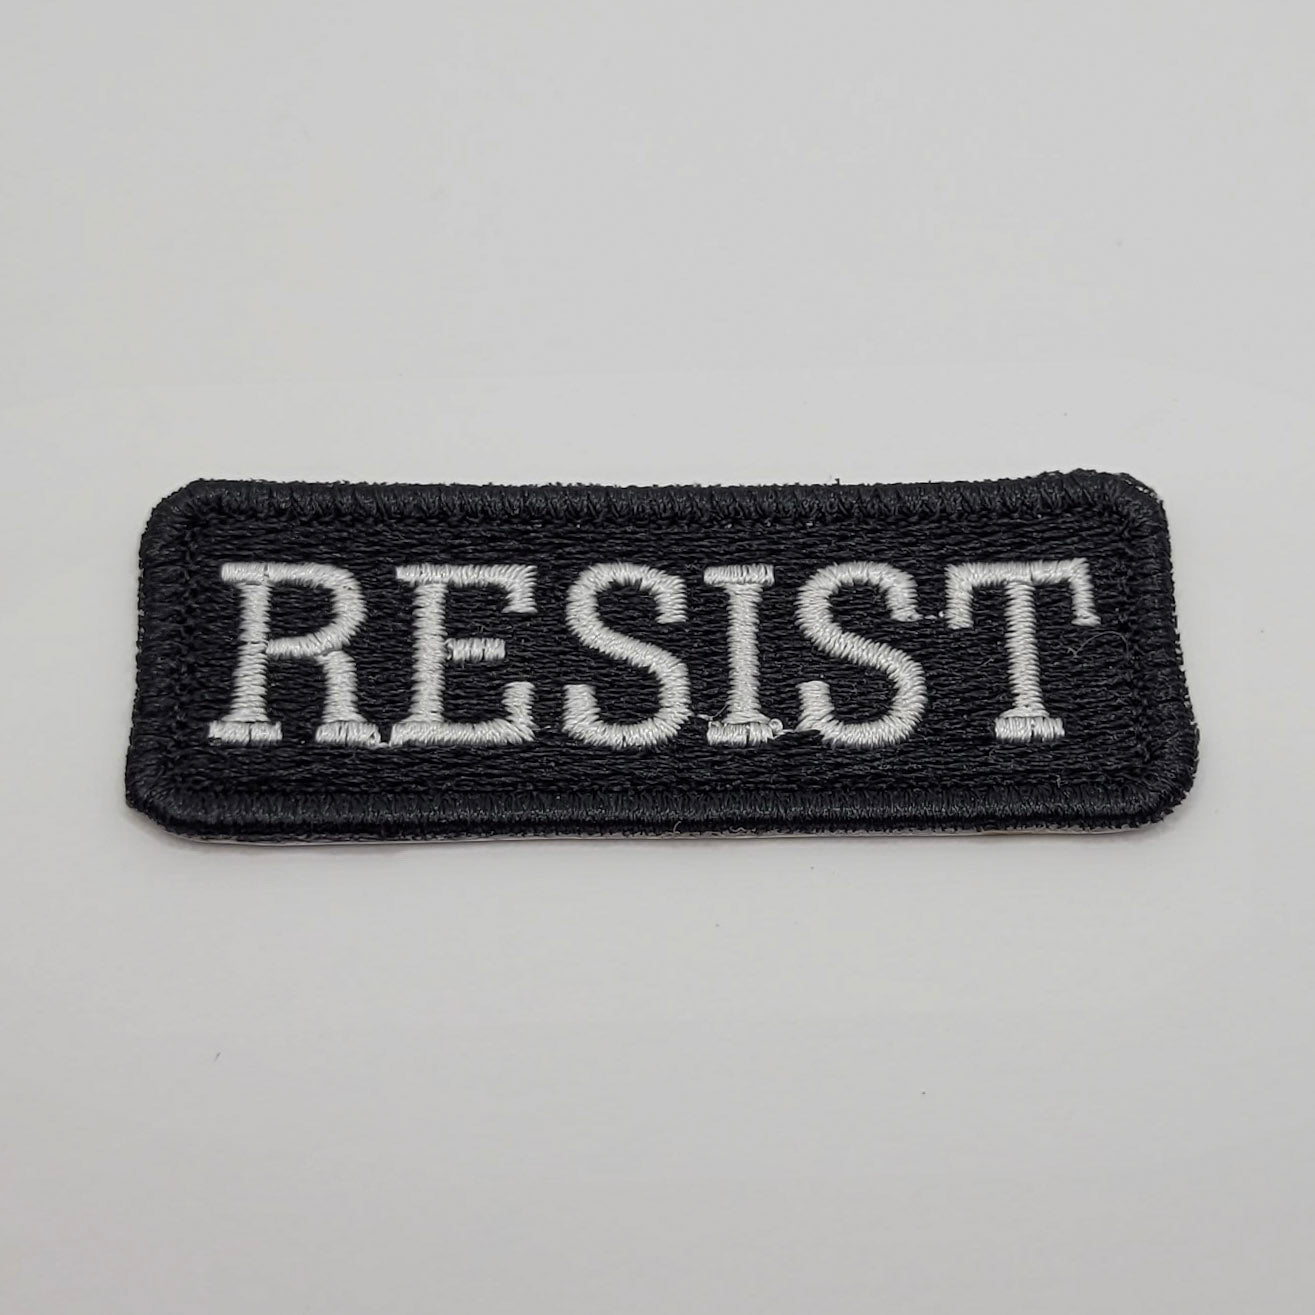 Resist Embroidered Patch